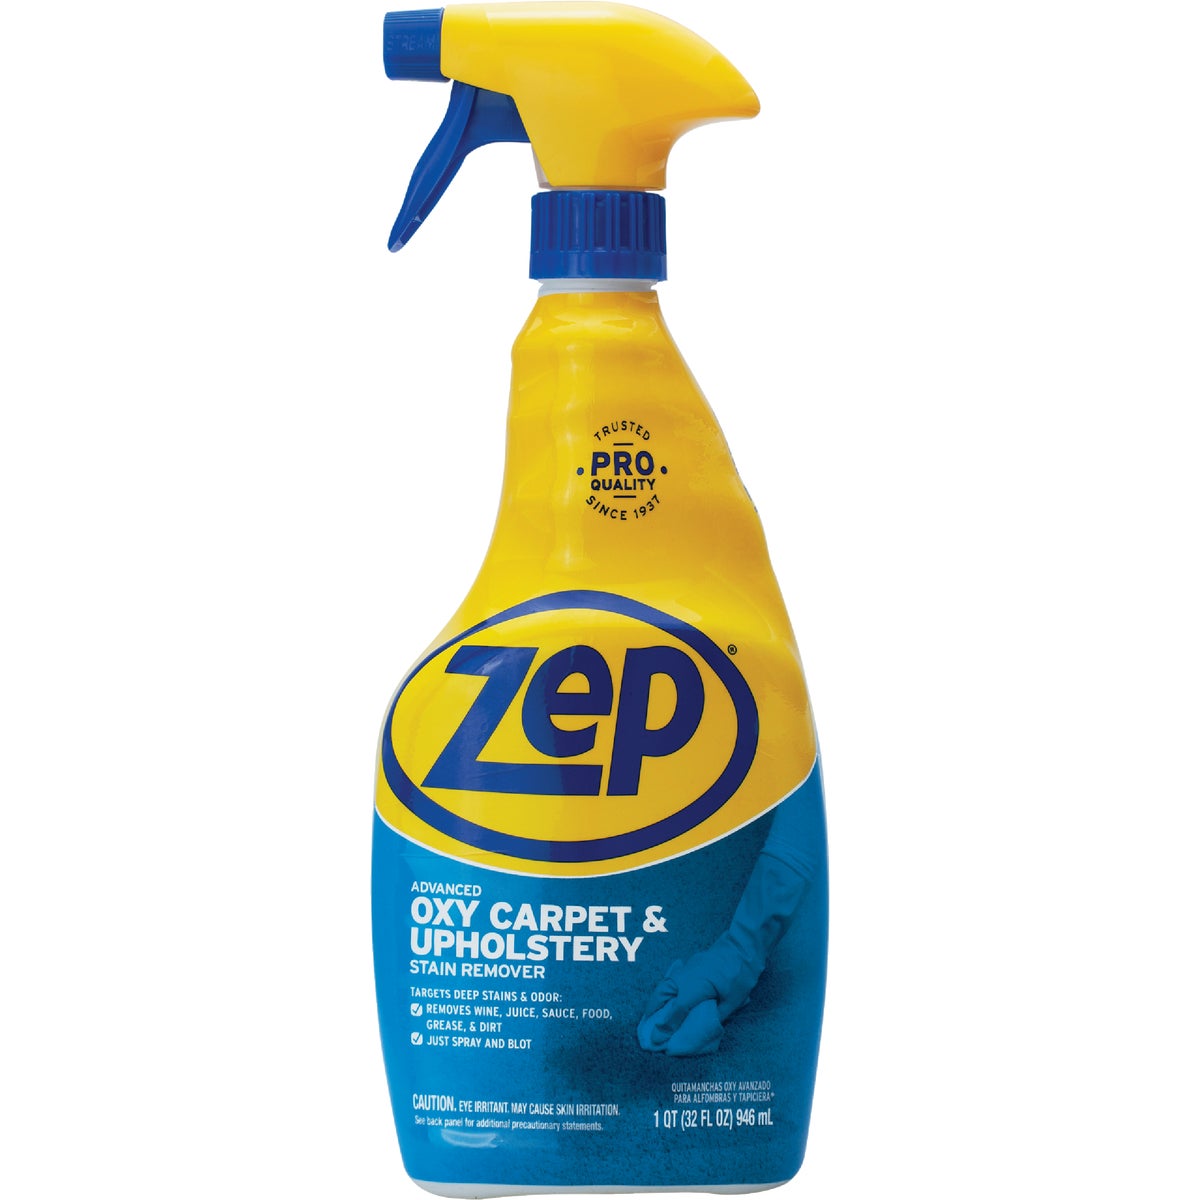 Zep Oxy Carpet & Upholstery Stain Remover